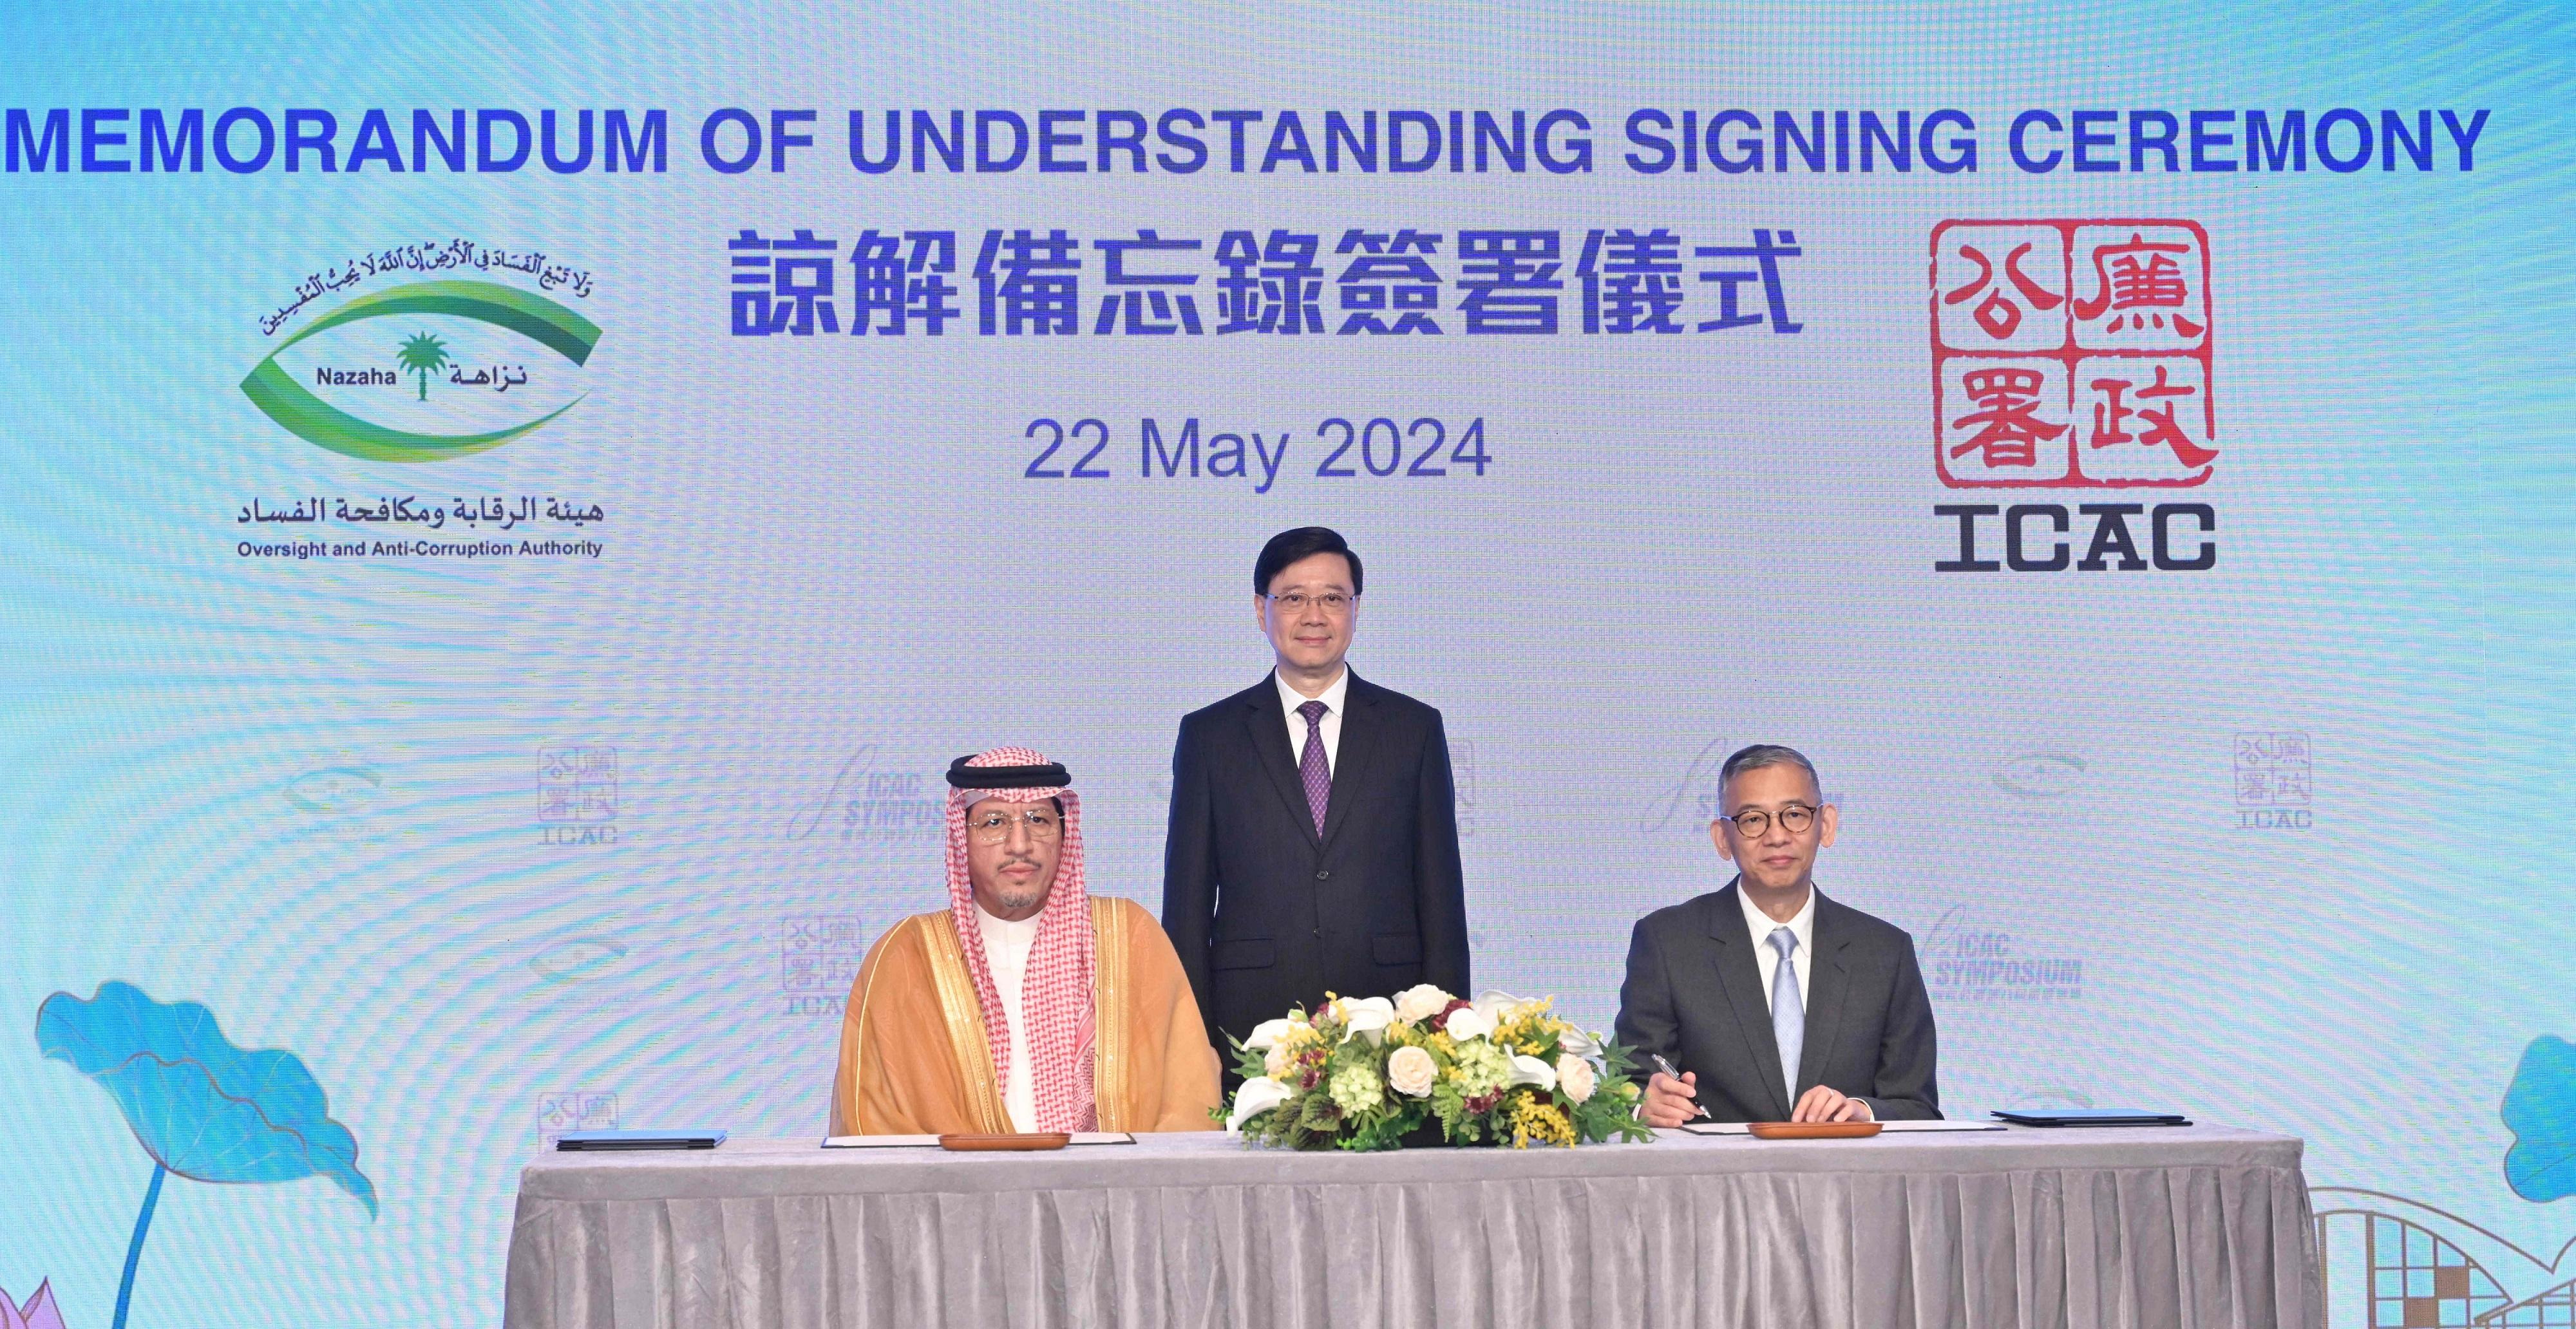 The Chief Executive, Mr John Lee, attended the 8th ICAC (Independent Commission Against Corruption) Symposium today (May 22). Photo shows Mr Lee (centre) witnessing the ICAC Commissioner, Mr Woo Ying-ming (right) and the President of the Oversight and Anti-Corruption Authority of the Kingdom of Saudi Arabia, Mr Mazin bin Ibrahim Al-Kahmous (left), signing a Memorandum of Understanding.